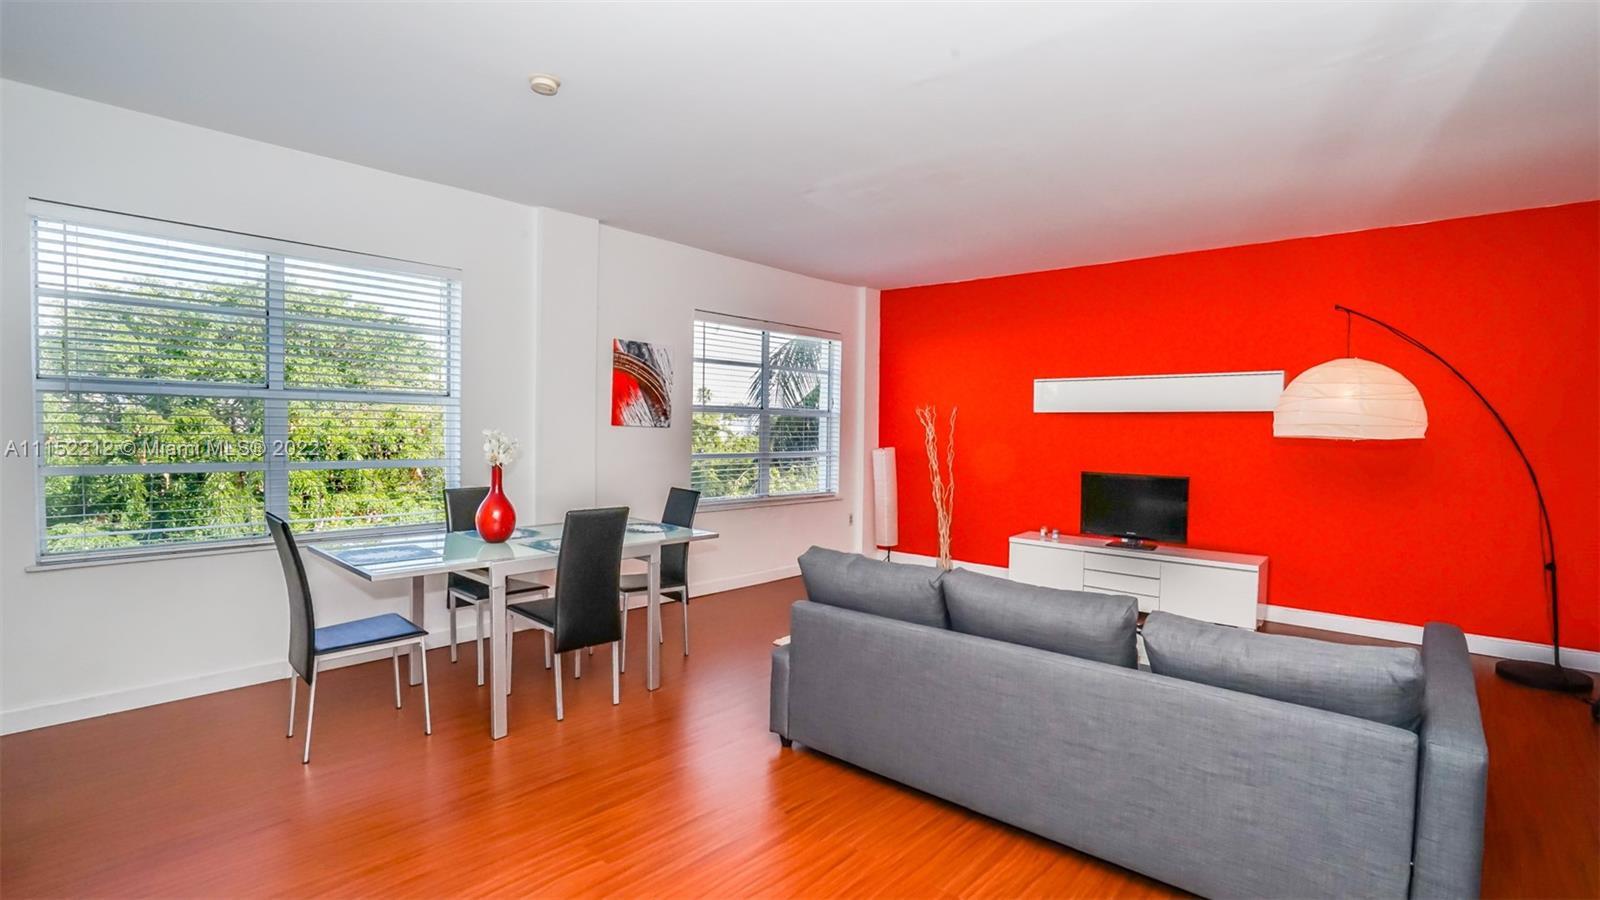 Very bright and large 1 bedroom in south beach. Unit is on top floor very quiet 1 full bathroom. 
O